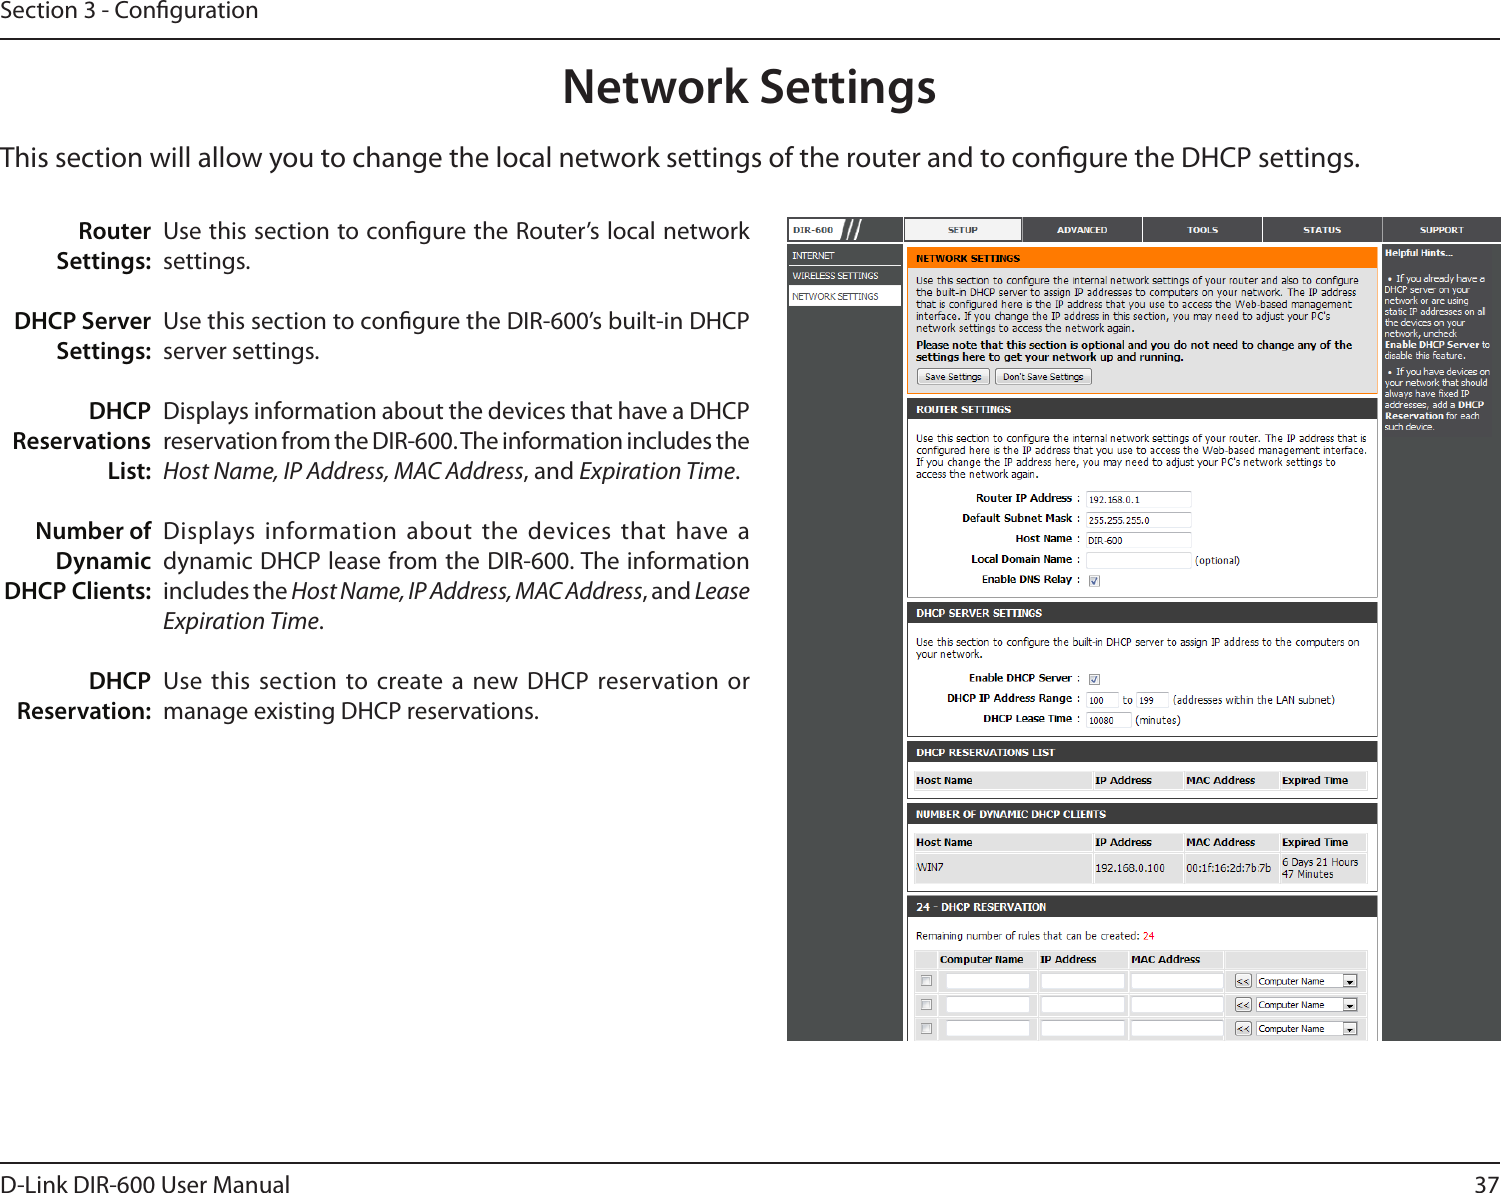 37D-Link DIR-600 User ManualSection 3 - CongurationThis section will allow you to change the local network settings of the router and to congure the DHCP settings.Network SettingsUse this section to congure the Router’s local network settings.Use this section to congure the DIR-600’s built-in DHCP server settings.Displays information about the devices that have a DHCP reservation from the DIR-600. The information includes the Host Name, IP Address, MAC Address, and Expiration Time.Displays information about the  devices that have a dynamic DHCP lease from the DIR-600. The information includes the Host Name, IP Address, MAC Address, and Lease Expiration Time.Use this section to create a new  DHCP reservation or manage existing DHCP reservations.Router Settings:DHCP Server Settings:DHCP Reservations List:Number of Dynamic DHCP Clients:DHCP Reservation: